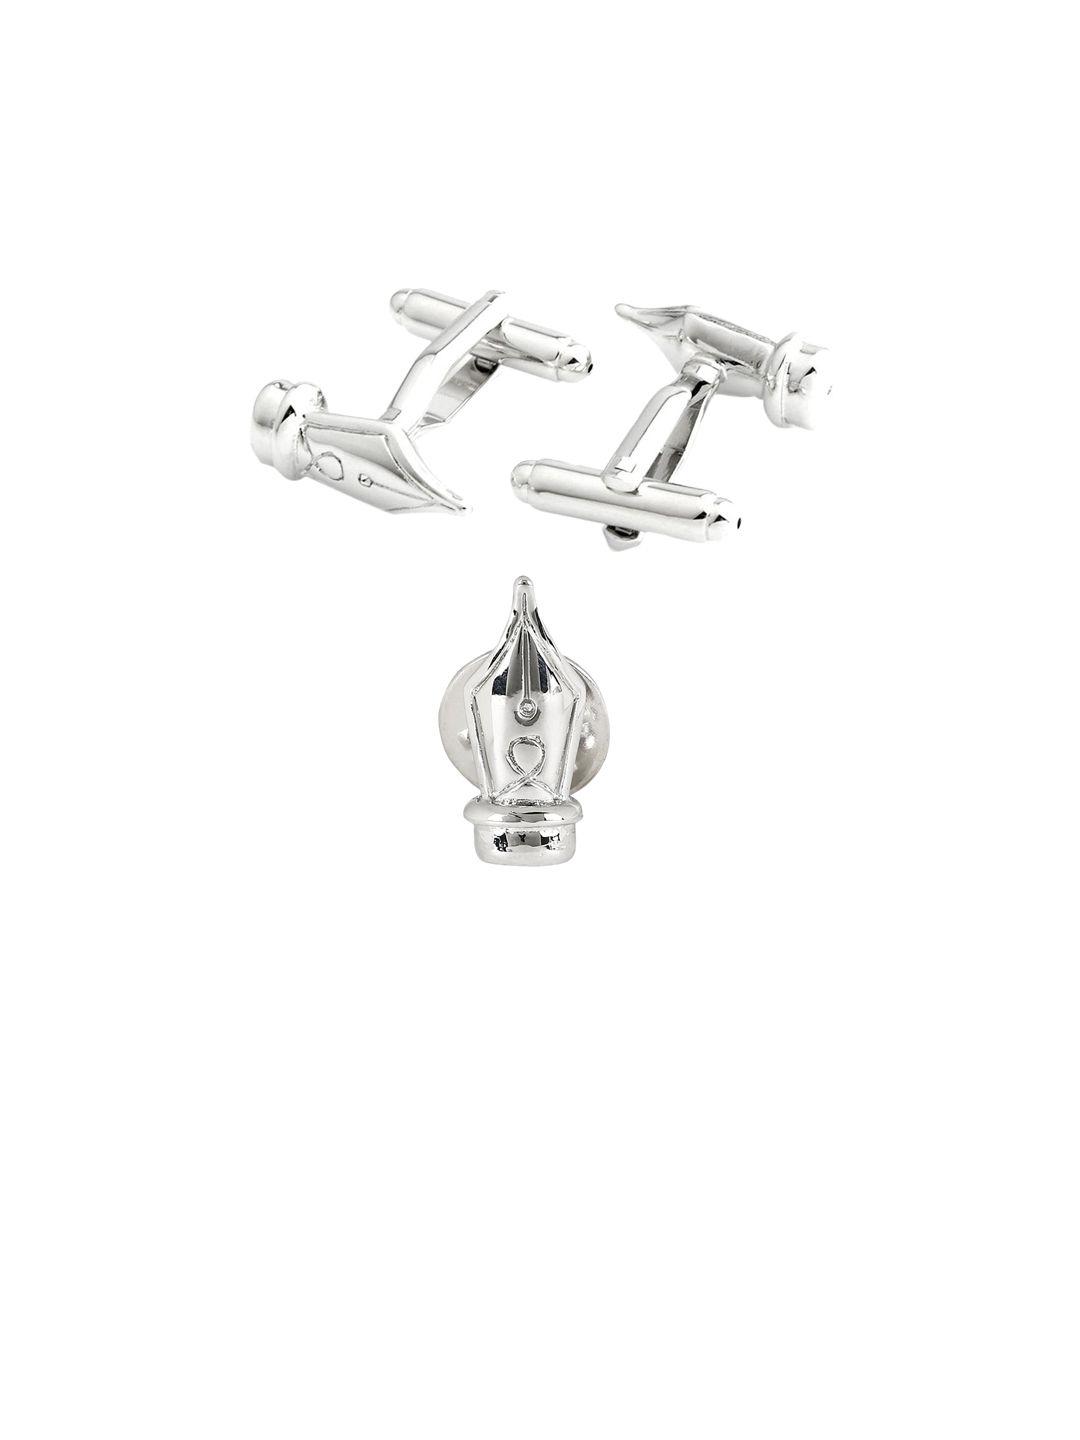 peluche silver-toned the writer's choice cufflink & lapel pin gift set